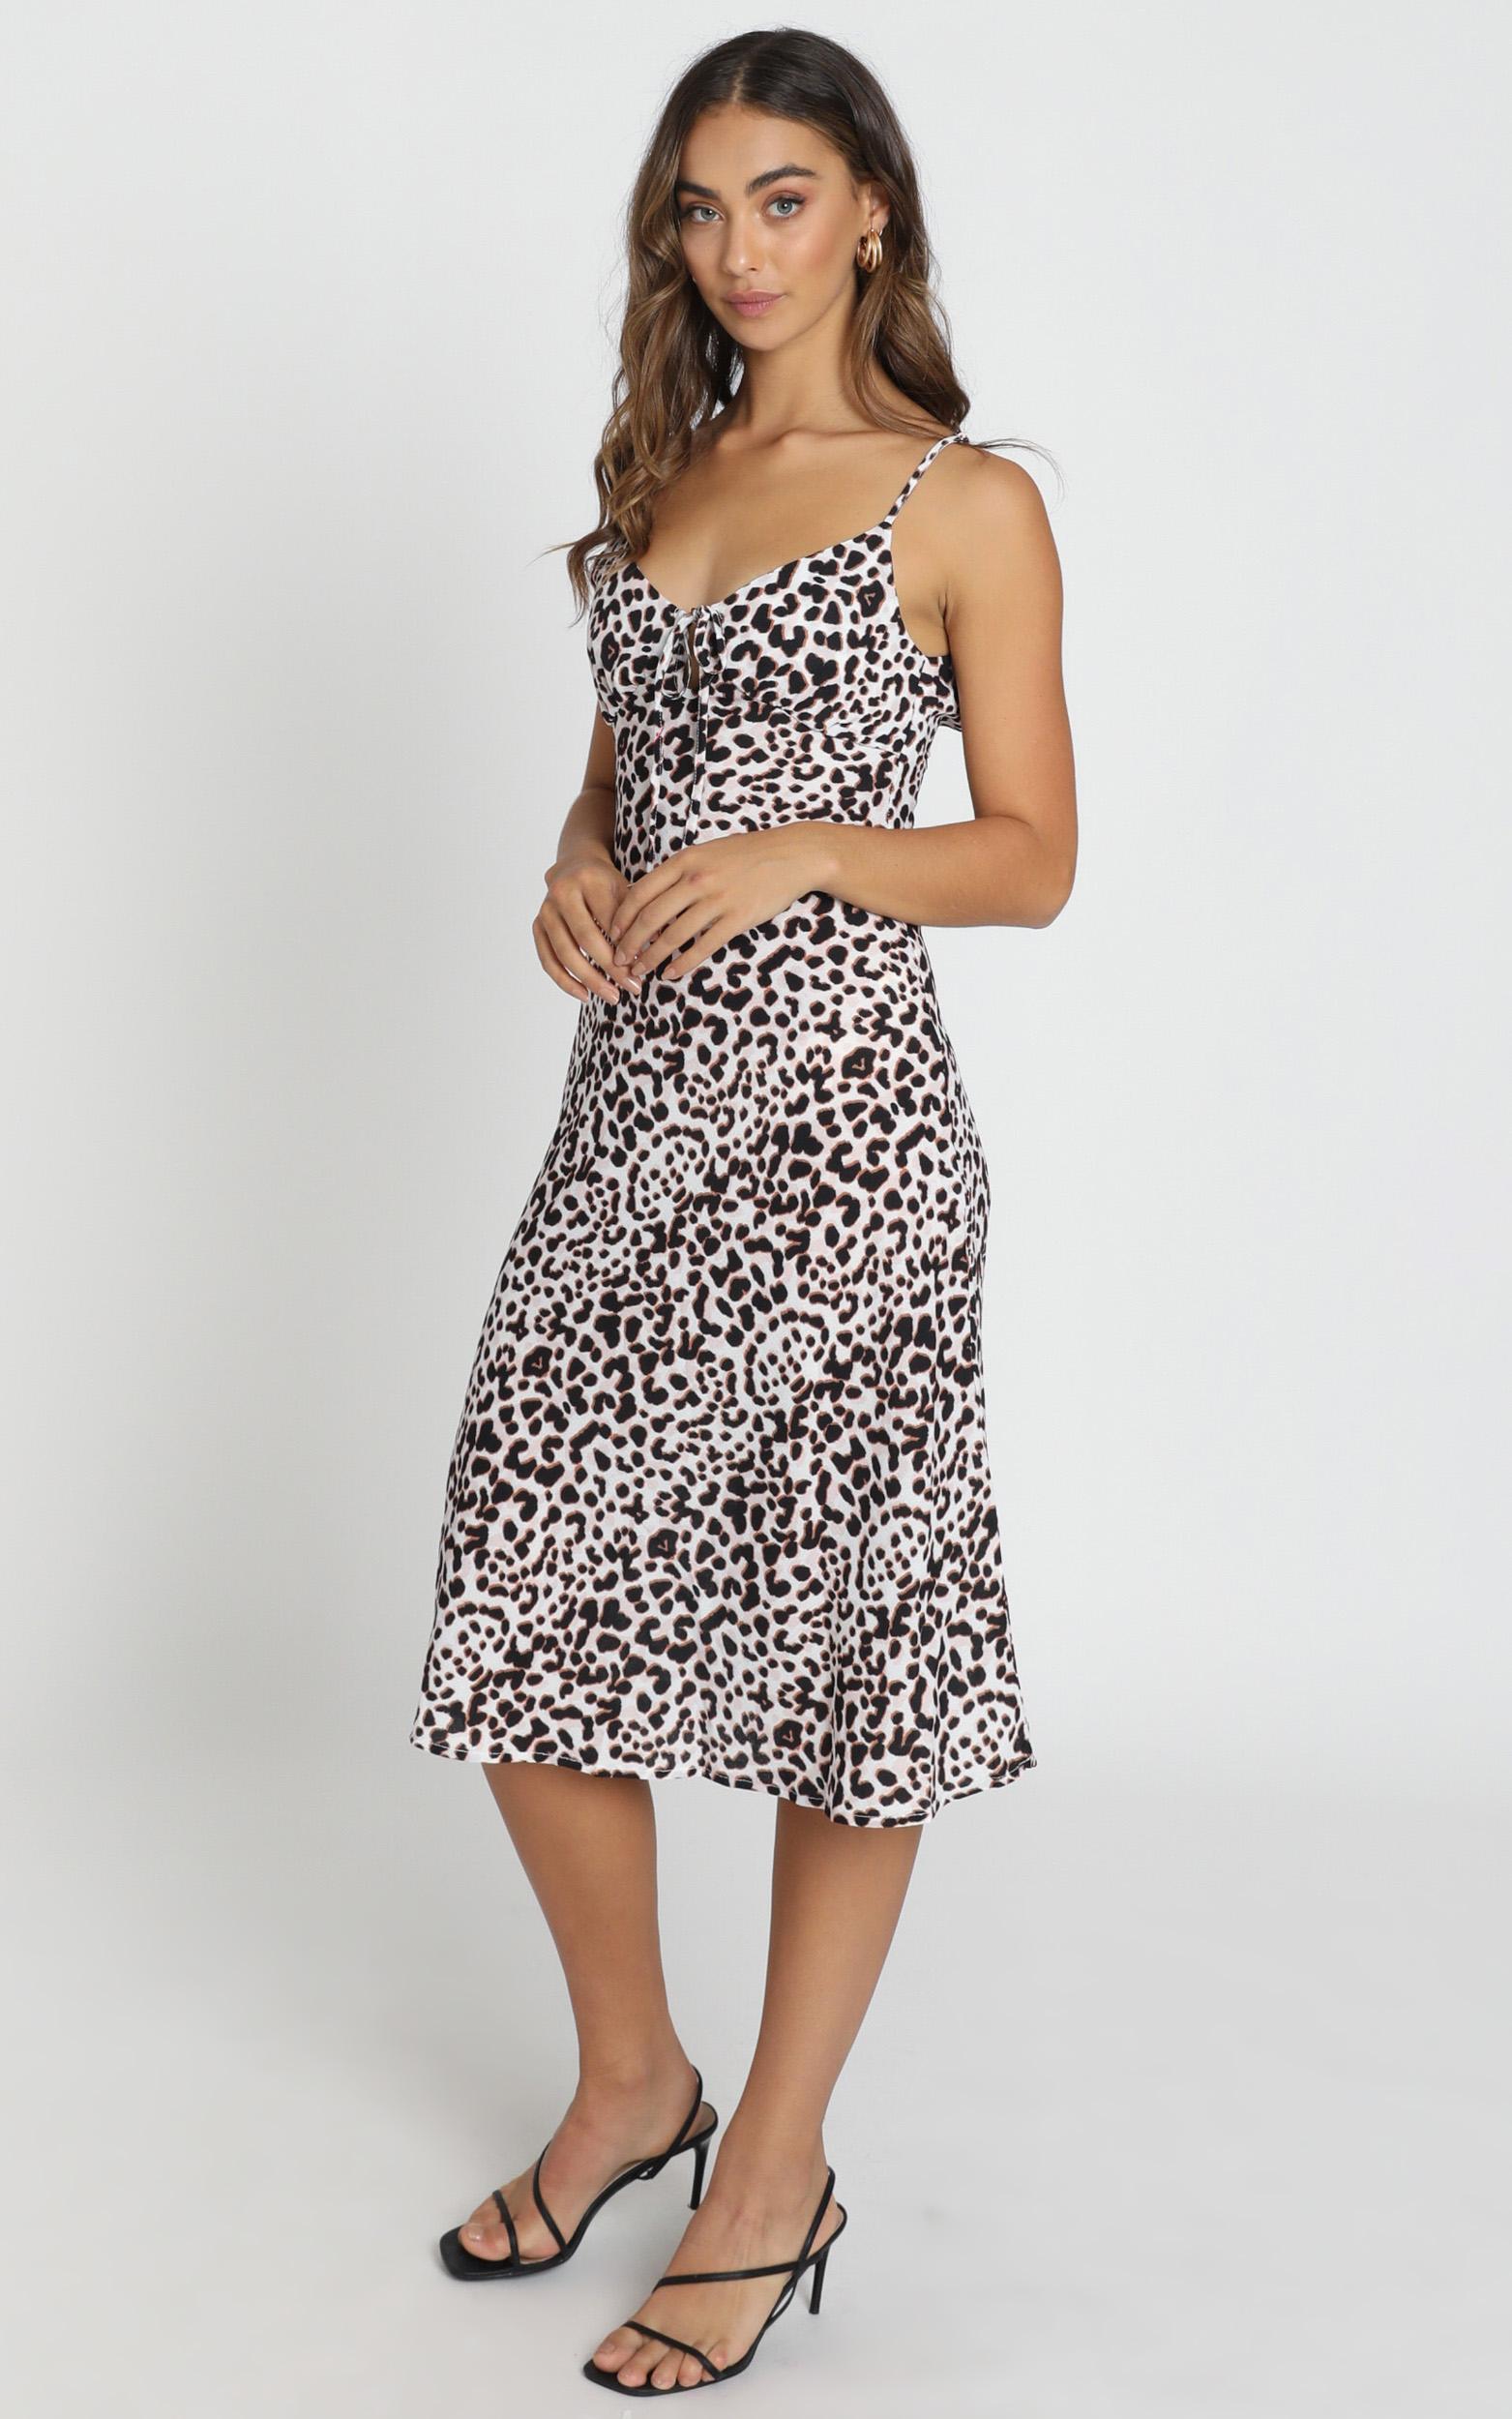 Toss the Dice Dress in white leopard - 6 (XS), WHT2, hi-res image number null